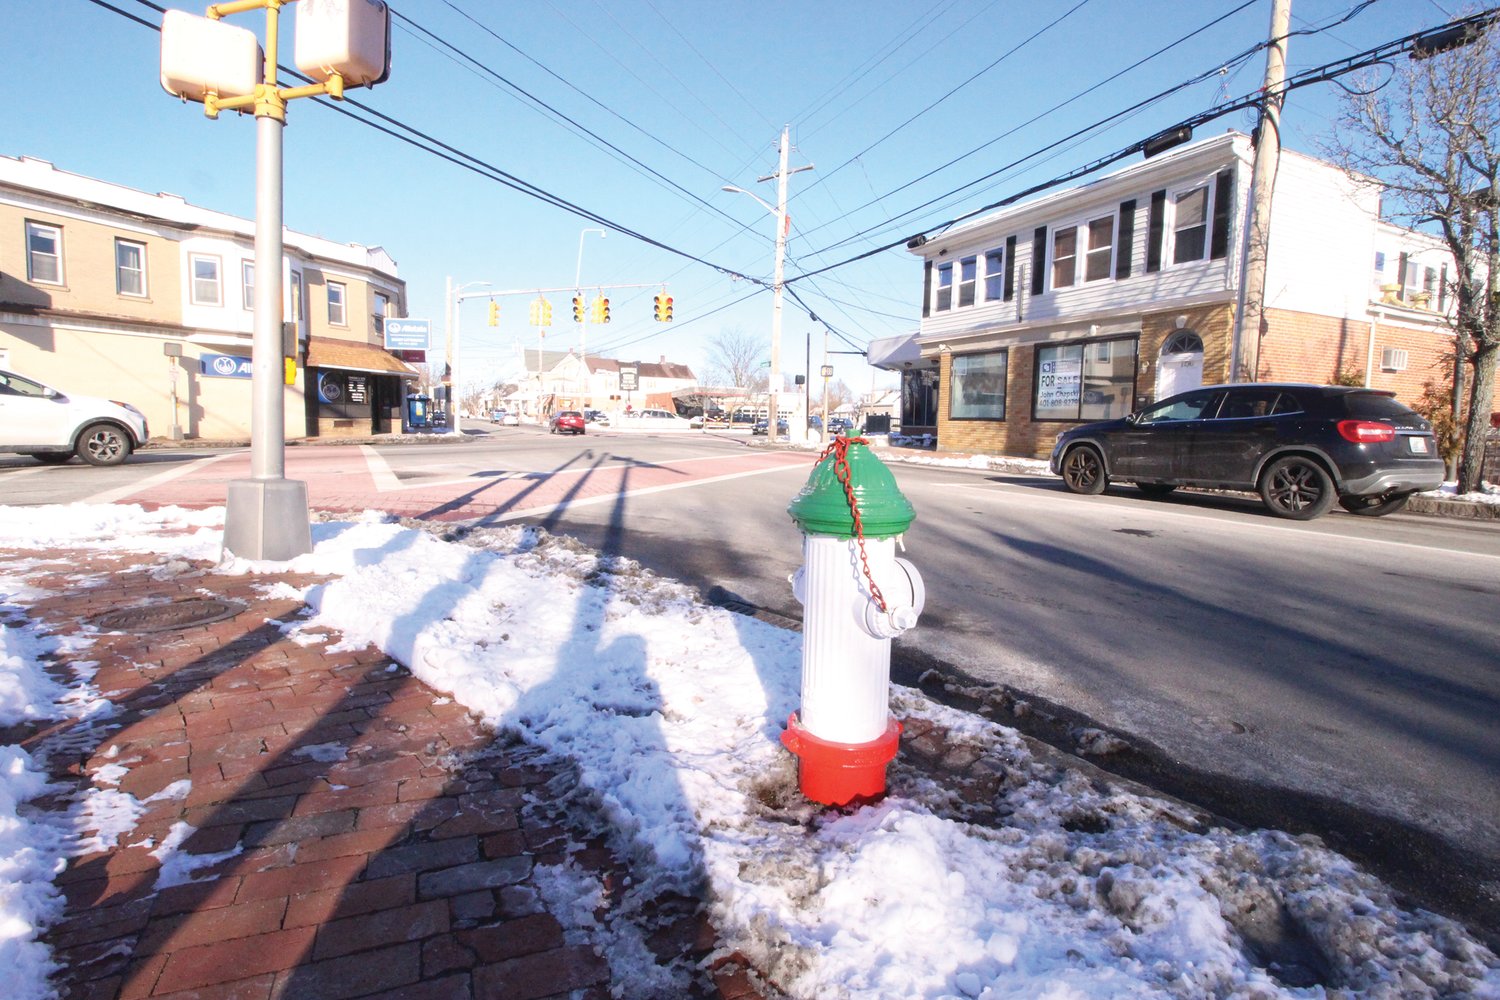 ITALIAN PRIDE: Painted in the colors of the Italian flag, fire hydrants in Knightsville display the strong Italian heritage and roots of locals. Holiday lights in the area also capture these colors – not to mention the road with its green, white and red stripes separating the traffic.